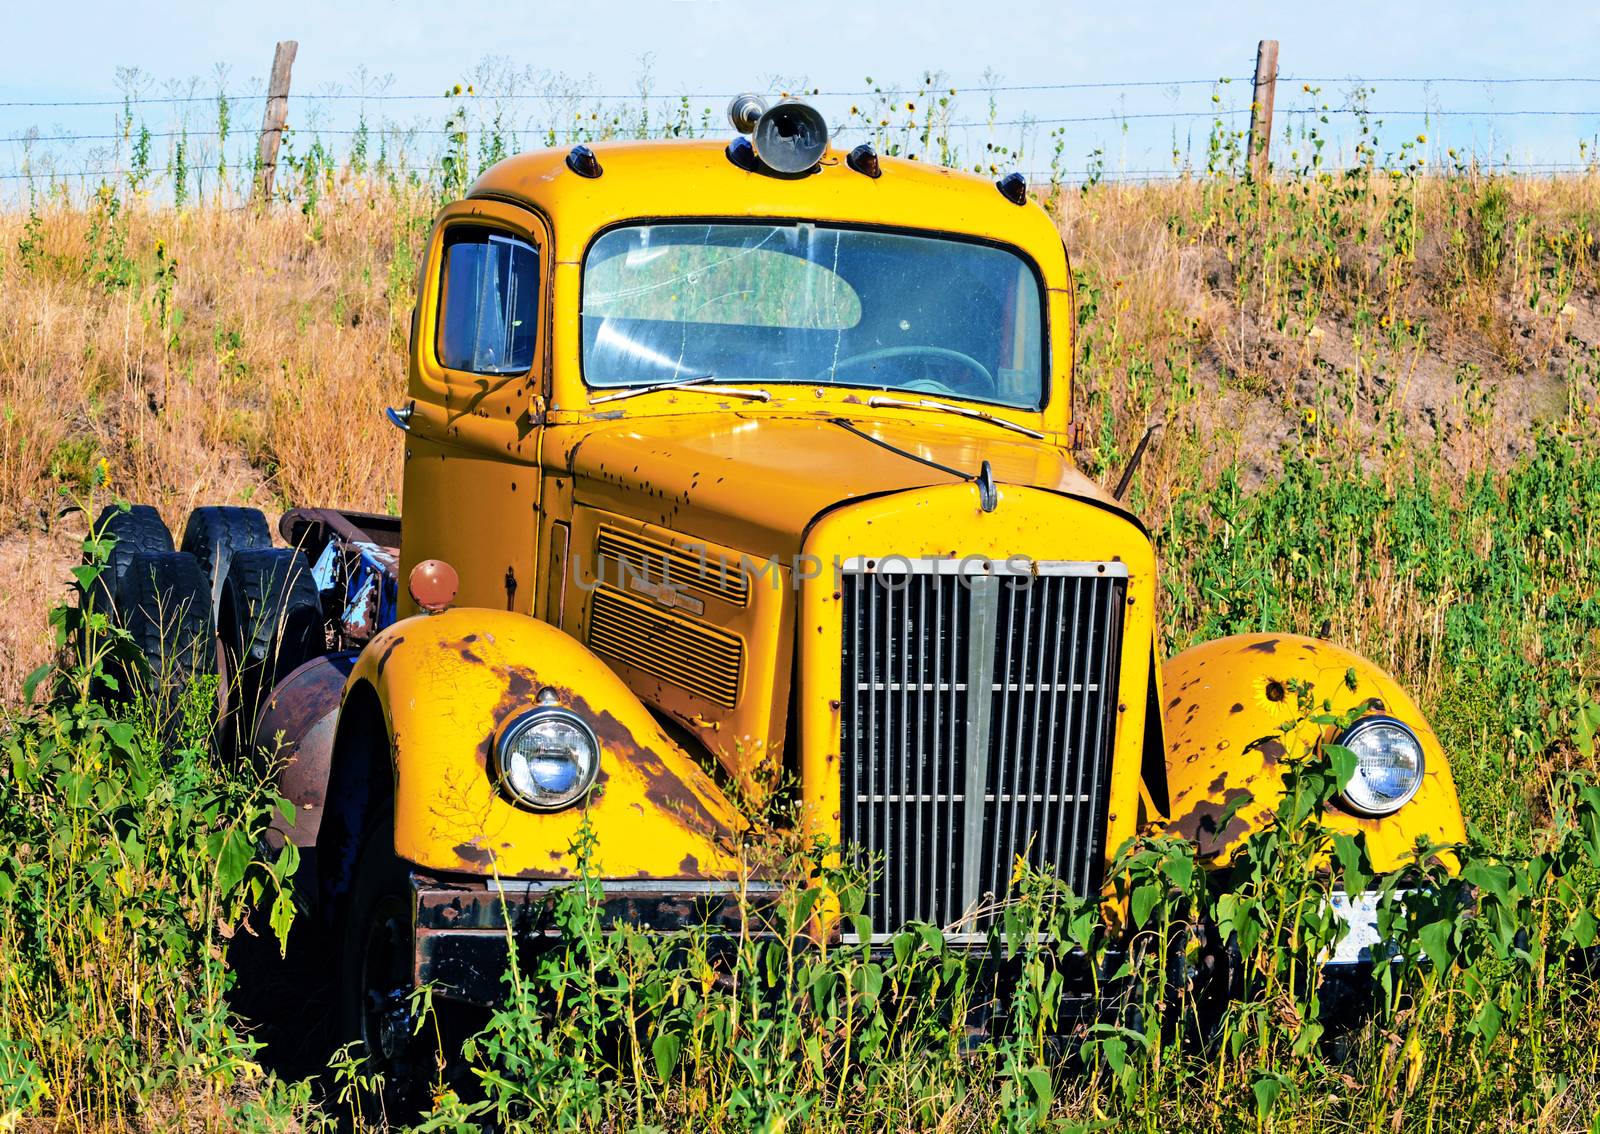 Worn out old truck abandoned in an out of the way spot with wild grass and sunflowers growing around it.